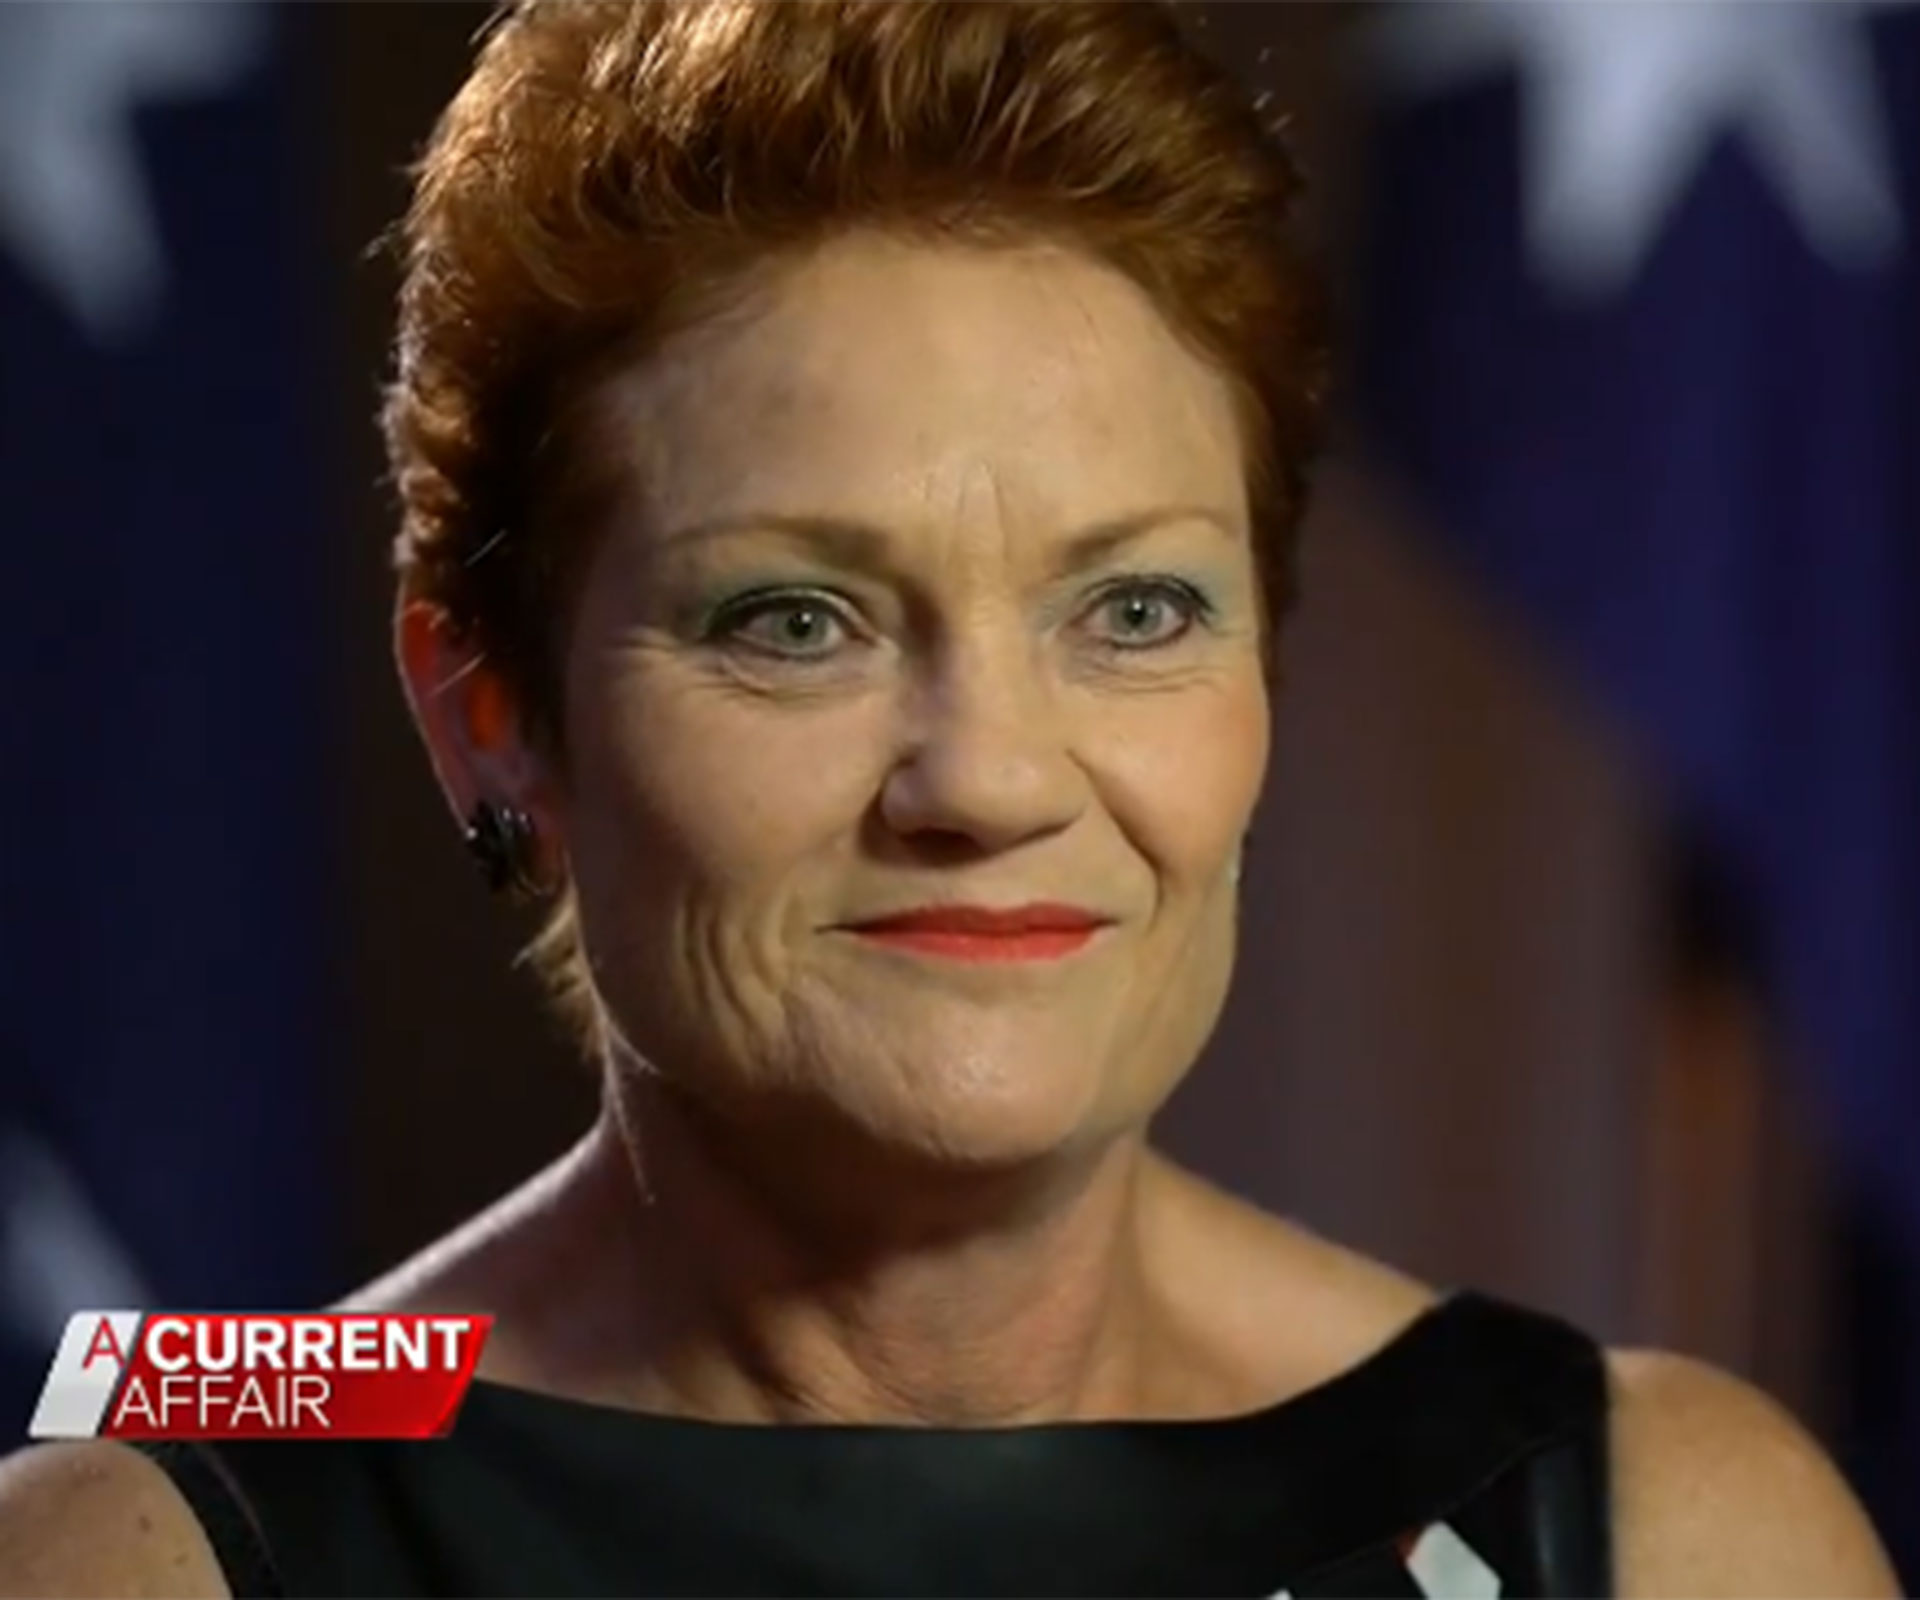 Pauline Hanson attacks Muslims on A Current Affair, asks how you know whether they’re “good ones”